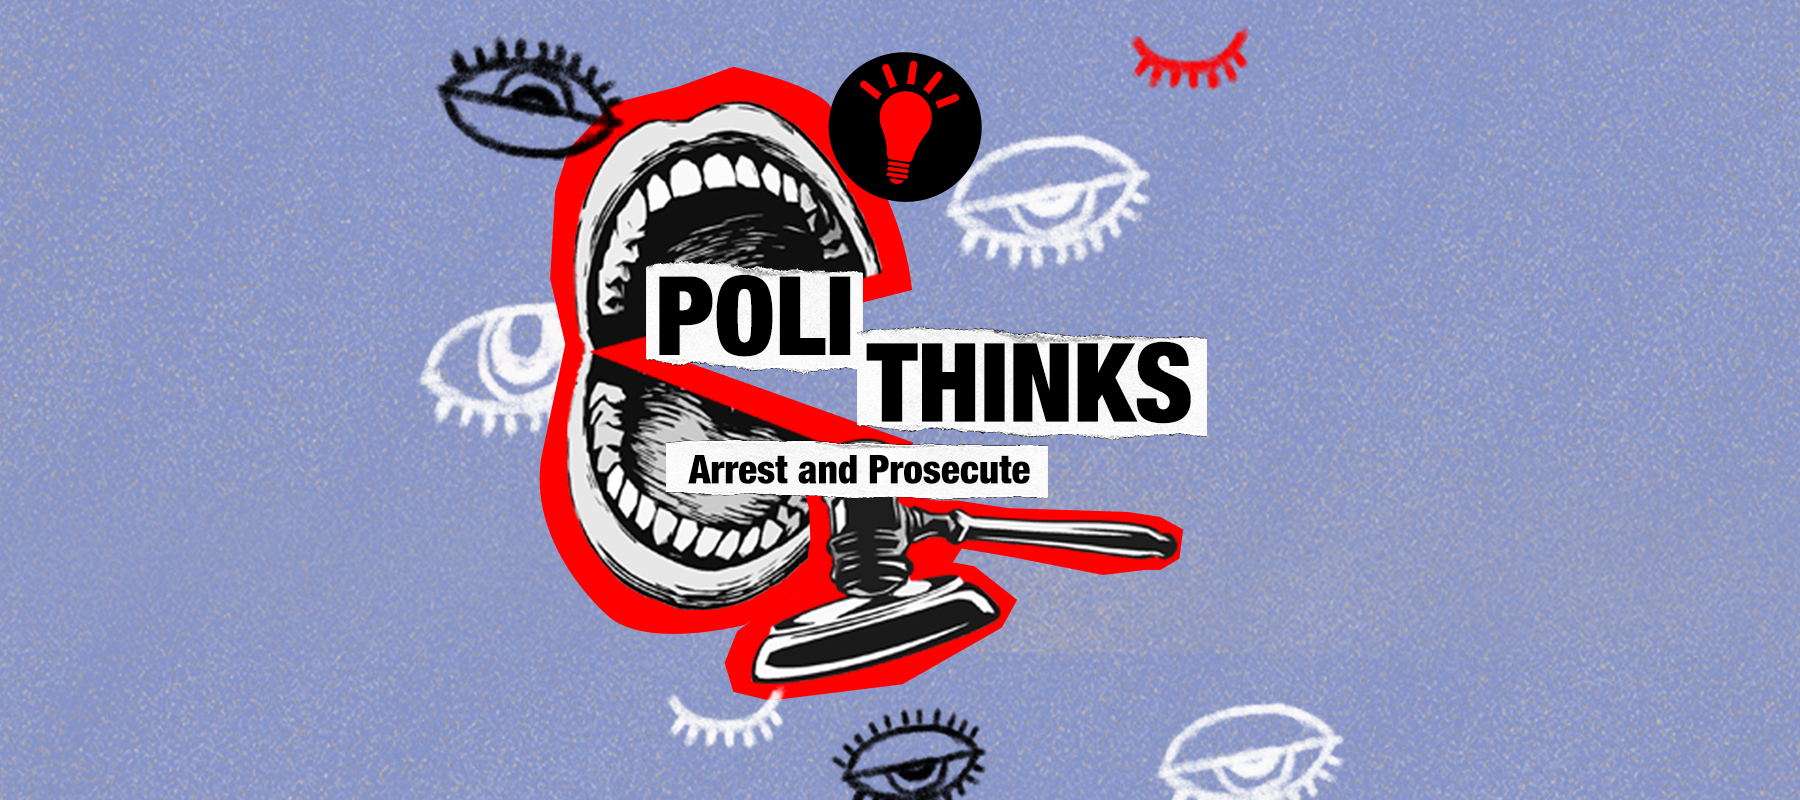 Polithinks: Arrest and Prosecute